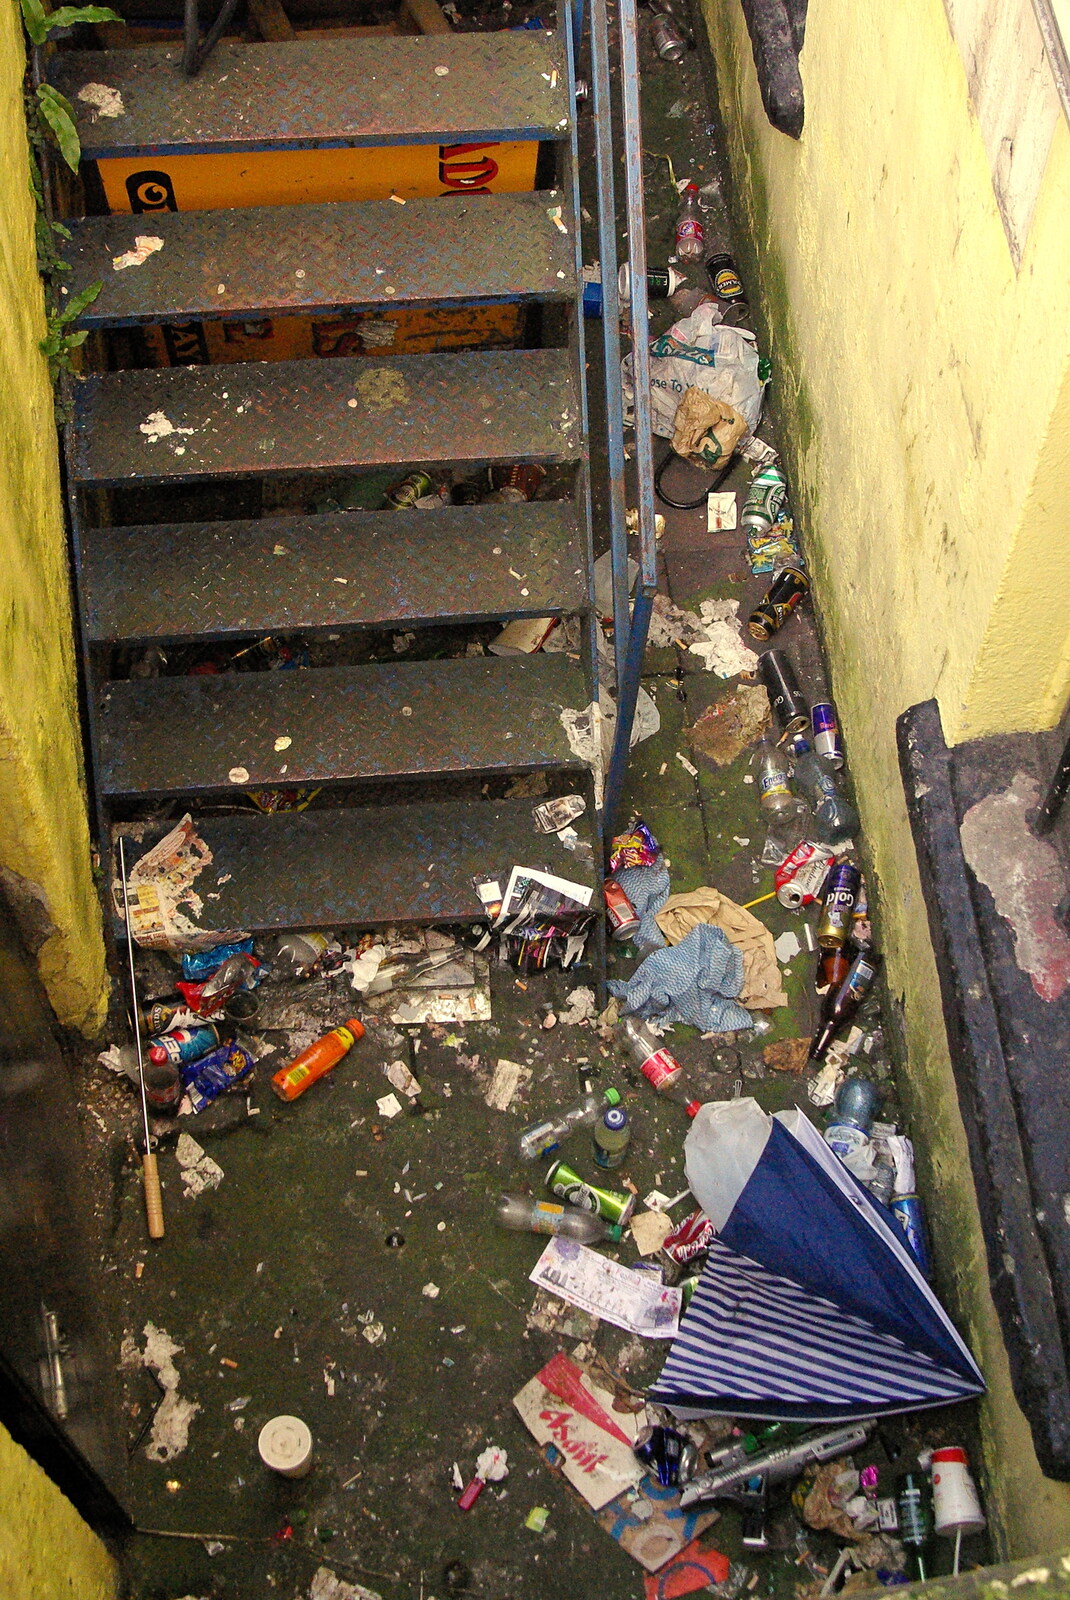 Easter in Dublin, Ireland - 21st March 2008: A basement staircase doubles as a rubbish bin